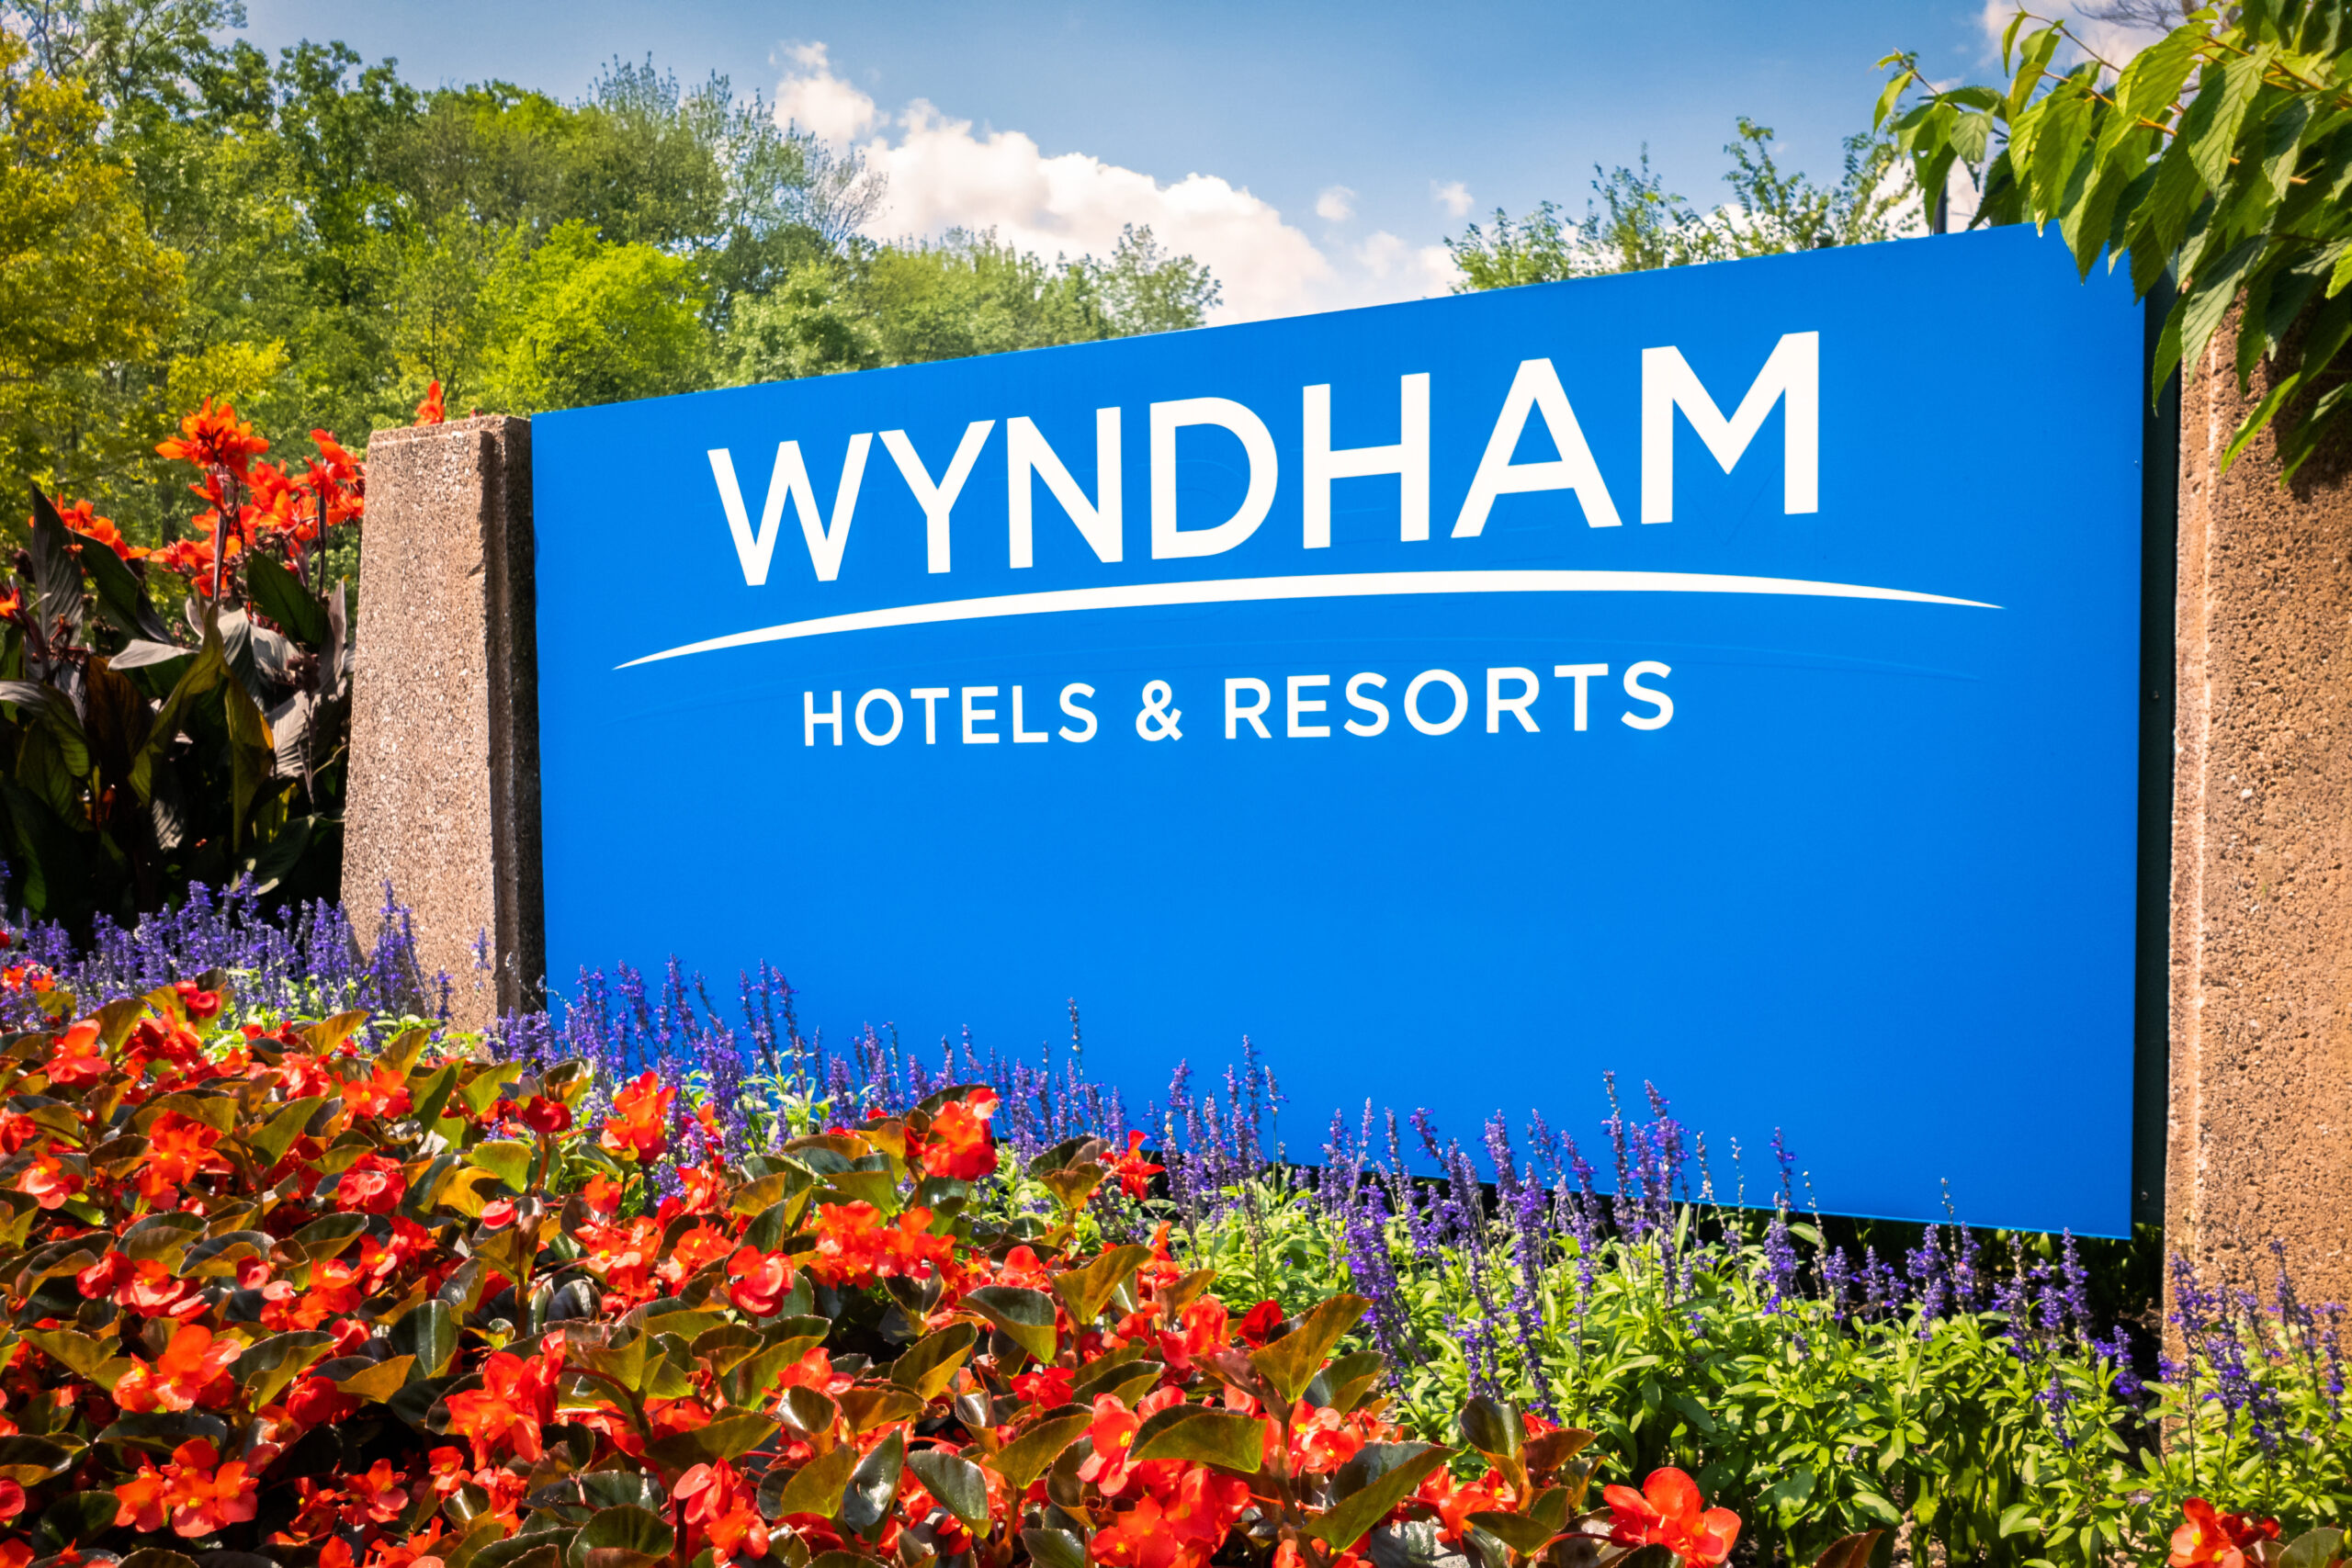 Wyndham Hotels and Resorts headquarters entrance sign. Wyndham Hotels and Resorts is an international hotel and resort chain based in the United States.